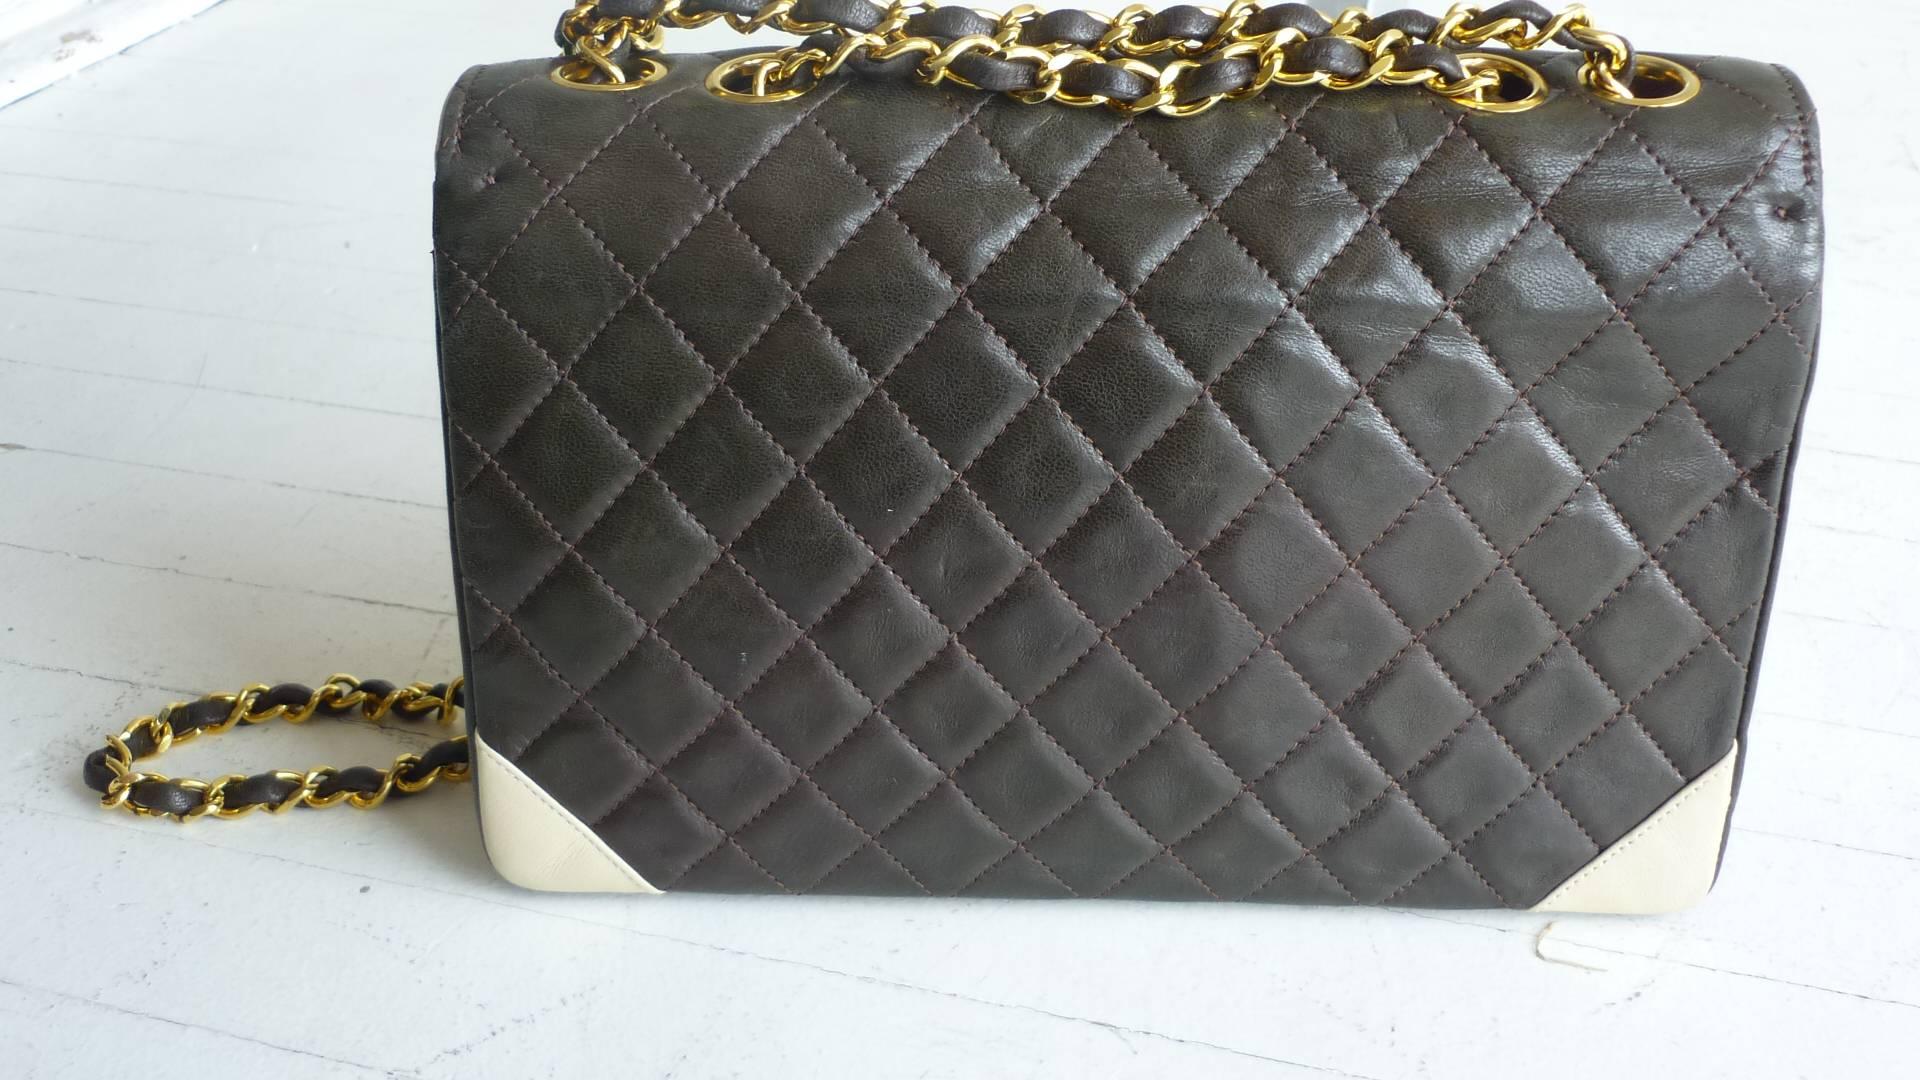 The handbag is made with signature quilted pattern lambskin, with the four corners and flap edge in beige leather. The lining is of burgundy leather with the big CC, made in France and Chanel Paris (see pictures).

There are two inside patch